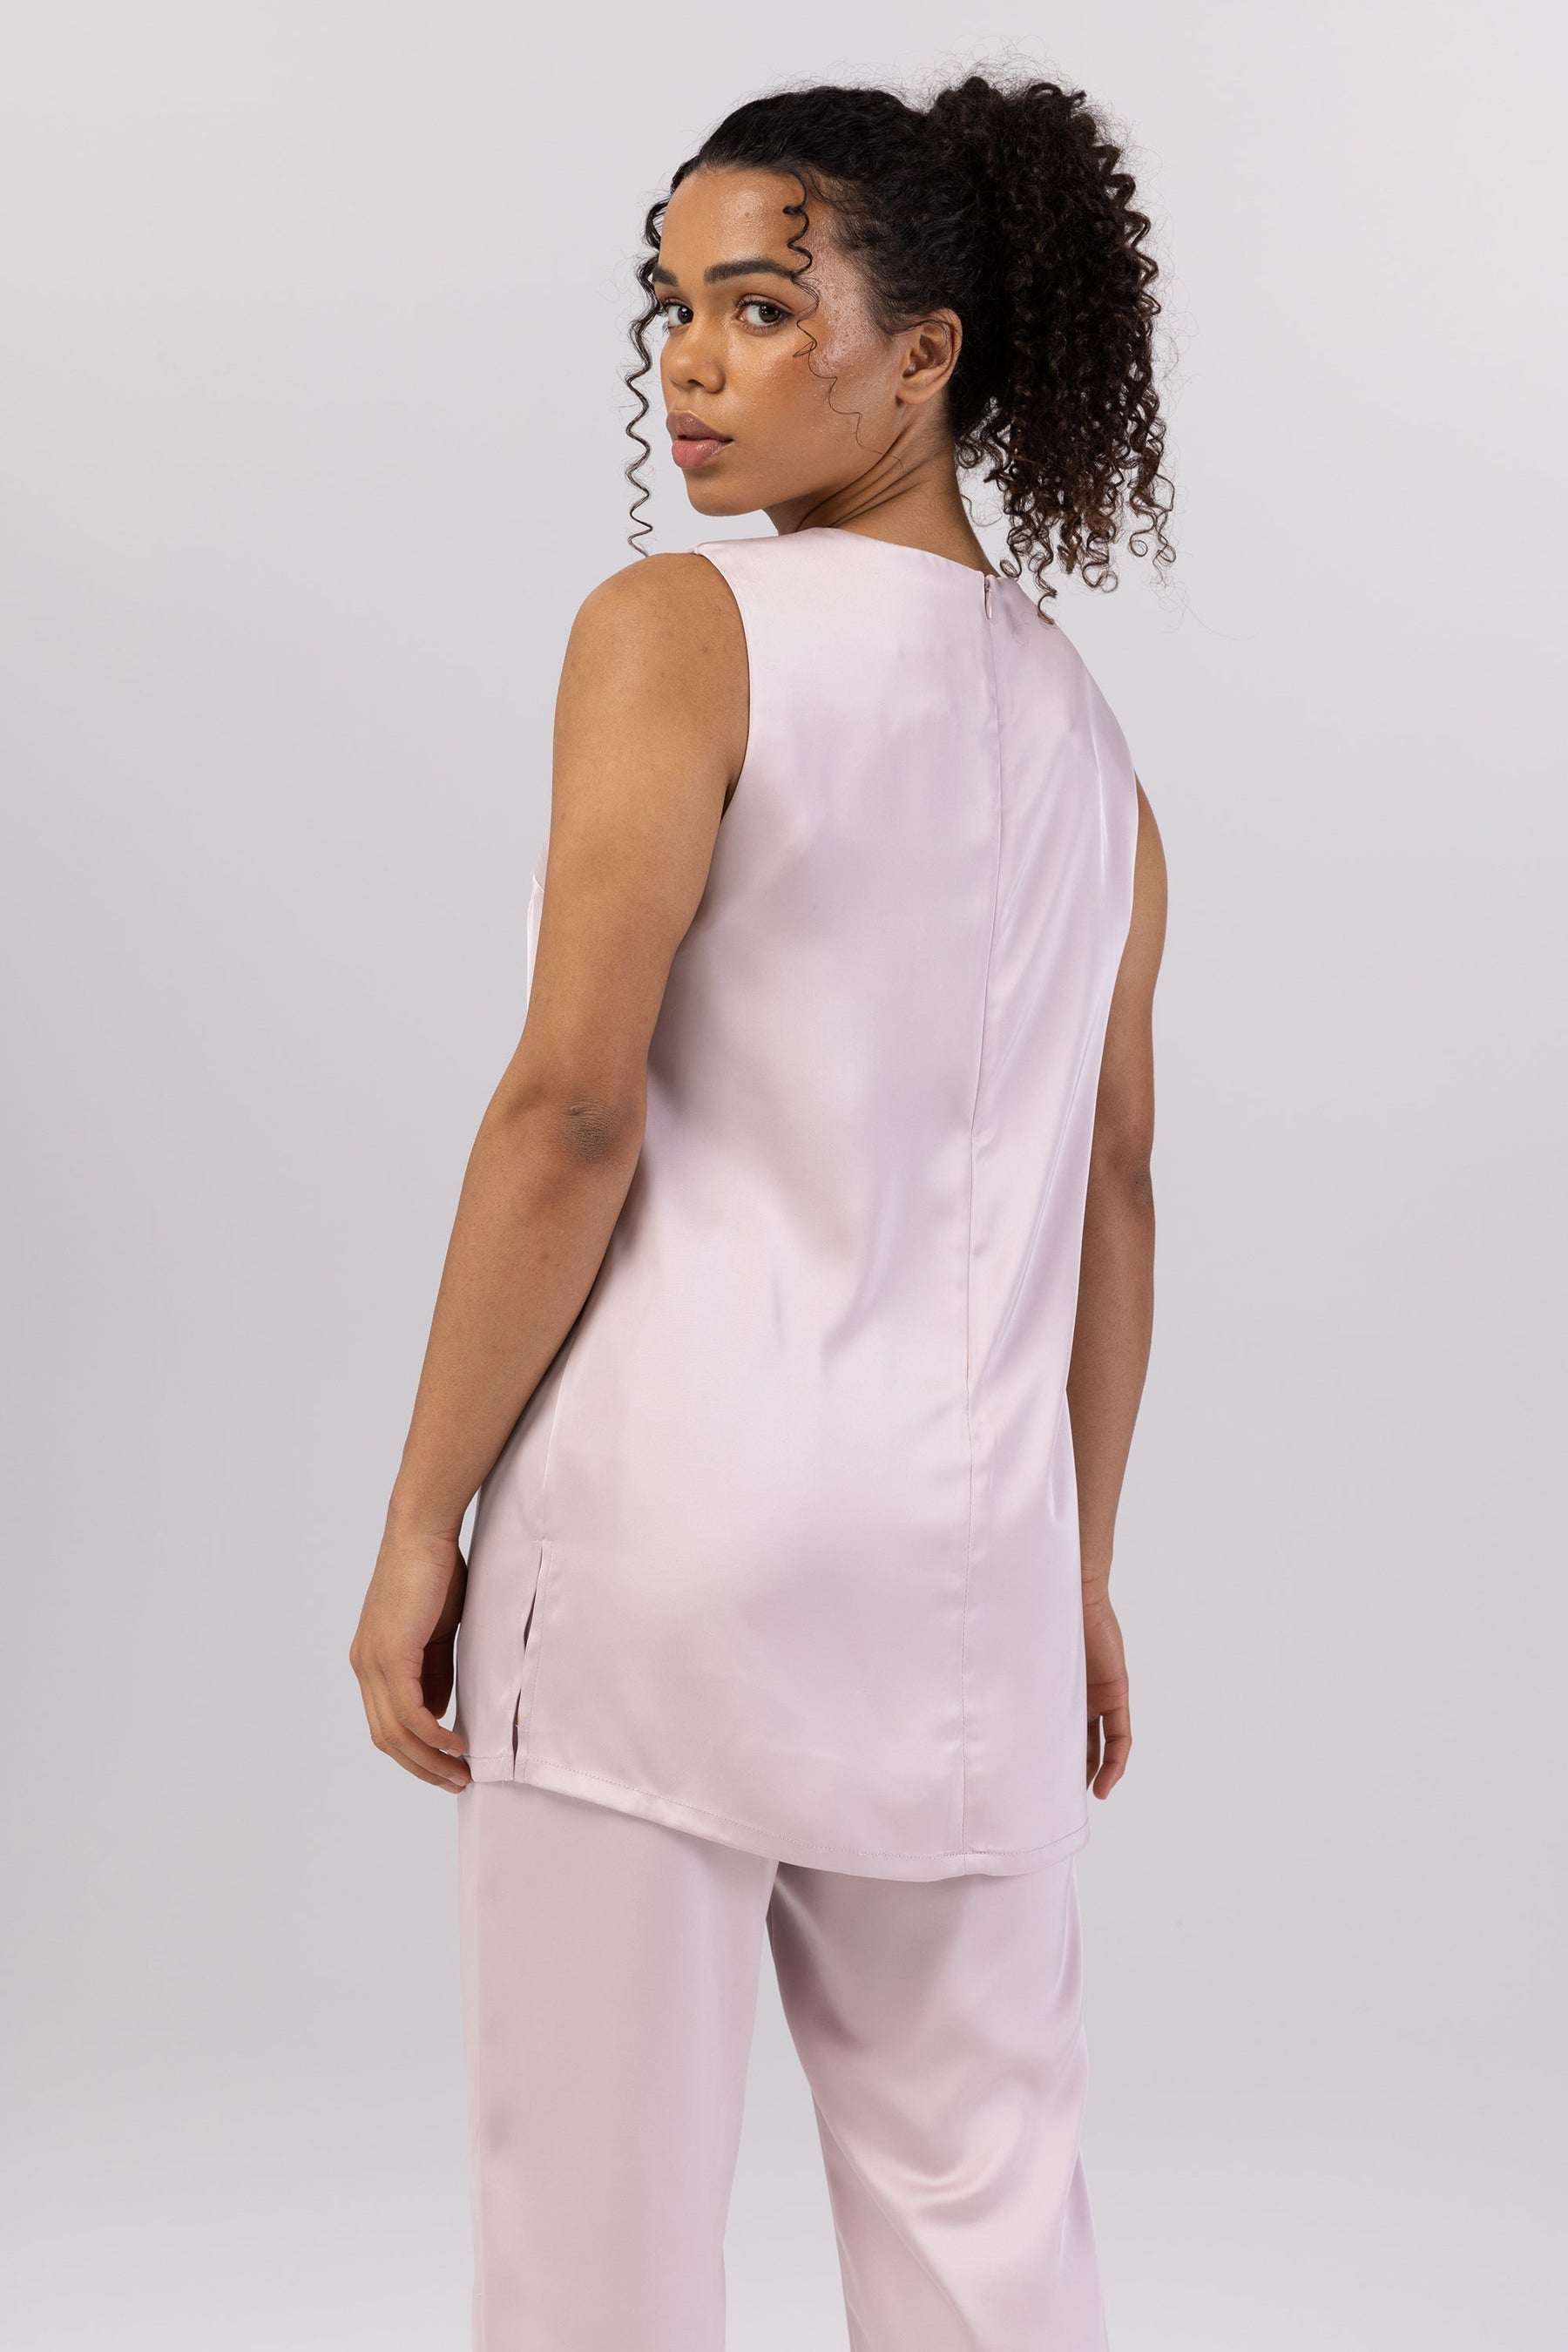 Zayna Satin Sleeveless Top - Dusty Pink (Nude Ivory) Veiled Collection 